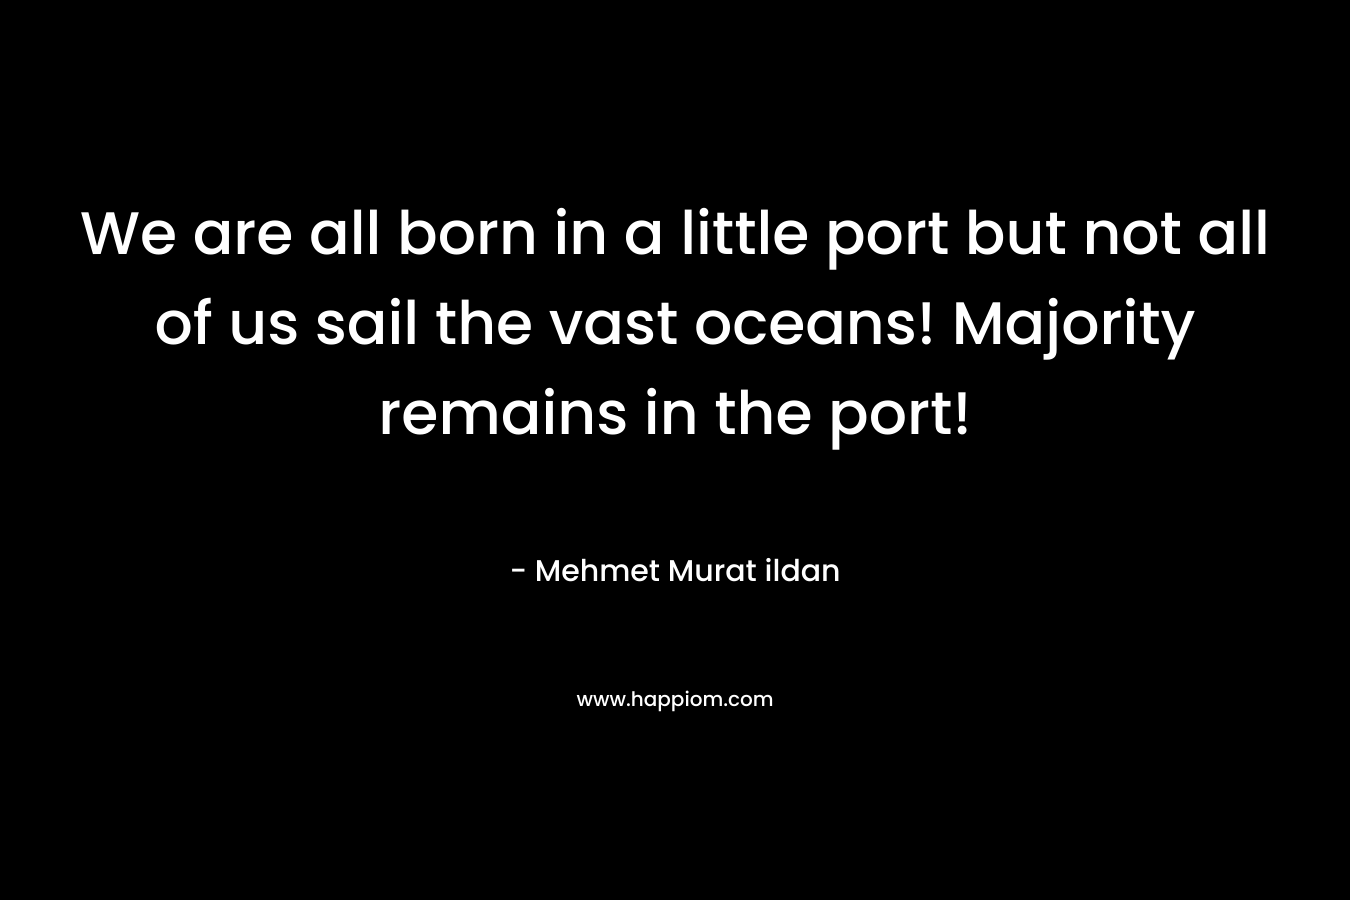 We are all born in a little port but not all of us sail the vast oceans! Majority remains in the port! – Mehmet Murat ildan